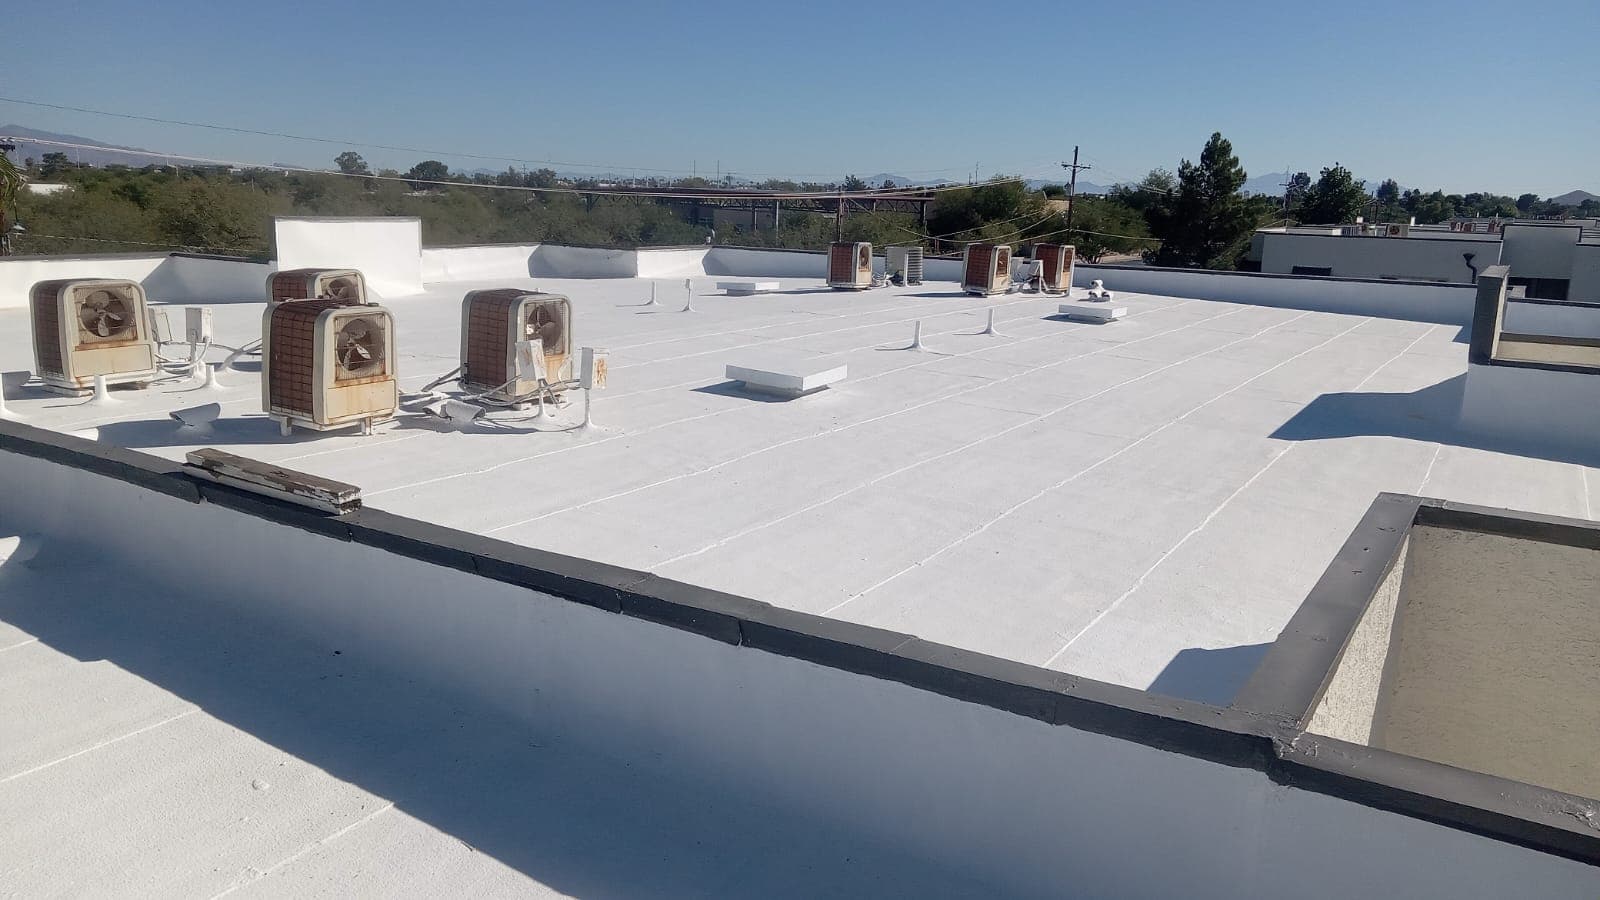 Biltmore Area roof with specialized coating to reflect the Arizona sun.